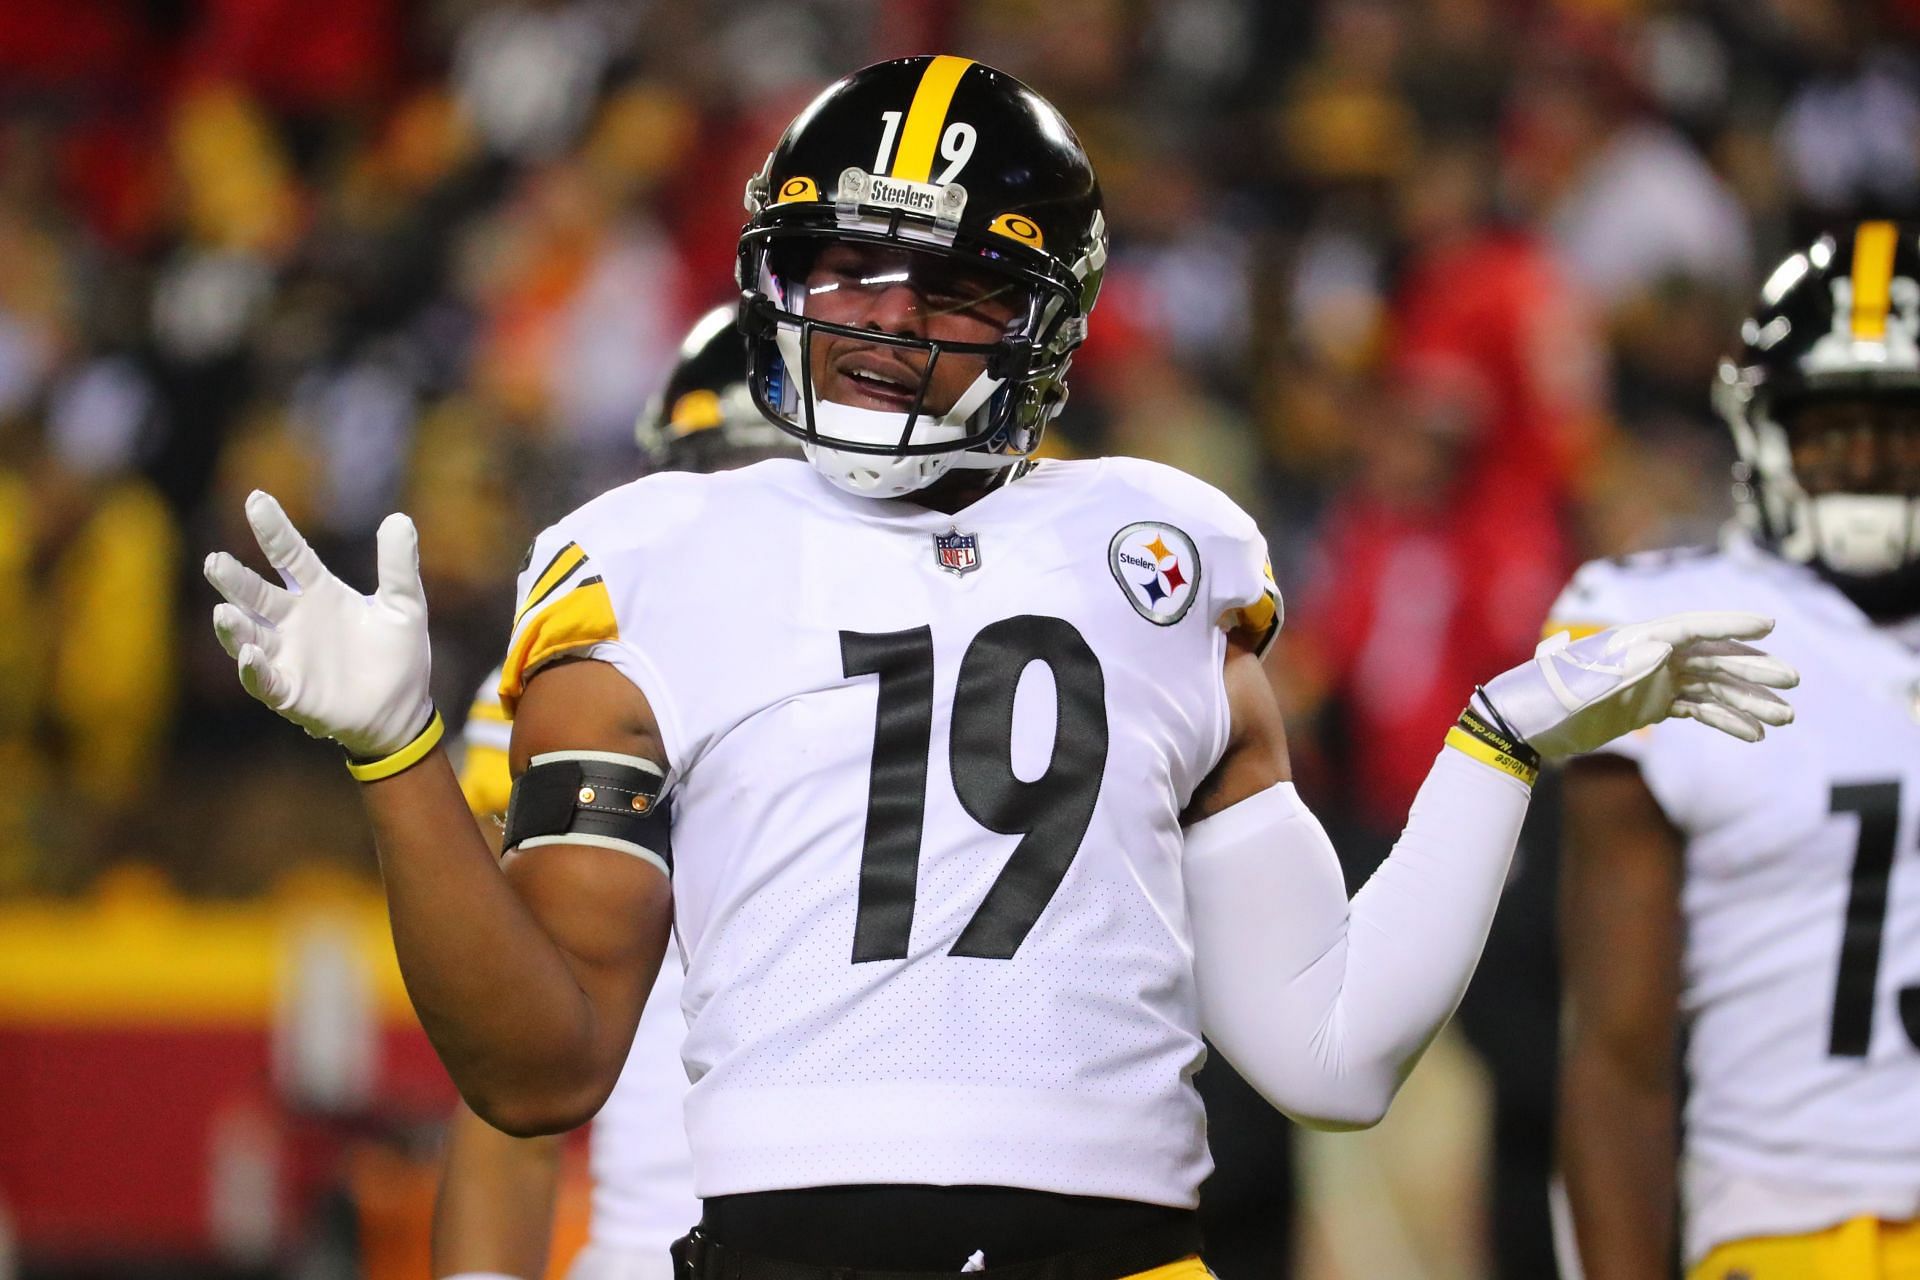 JuJu Smith-Schuster has traditionally thrived as WR2, rather than a primary target